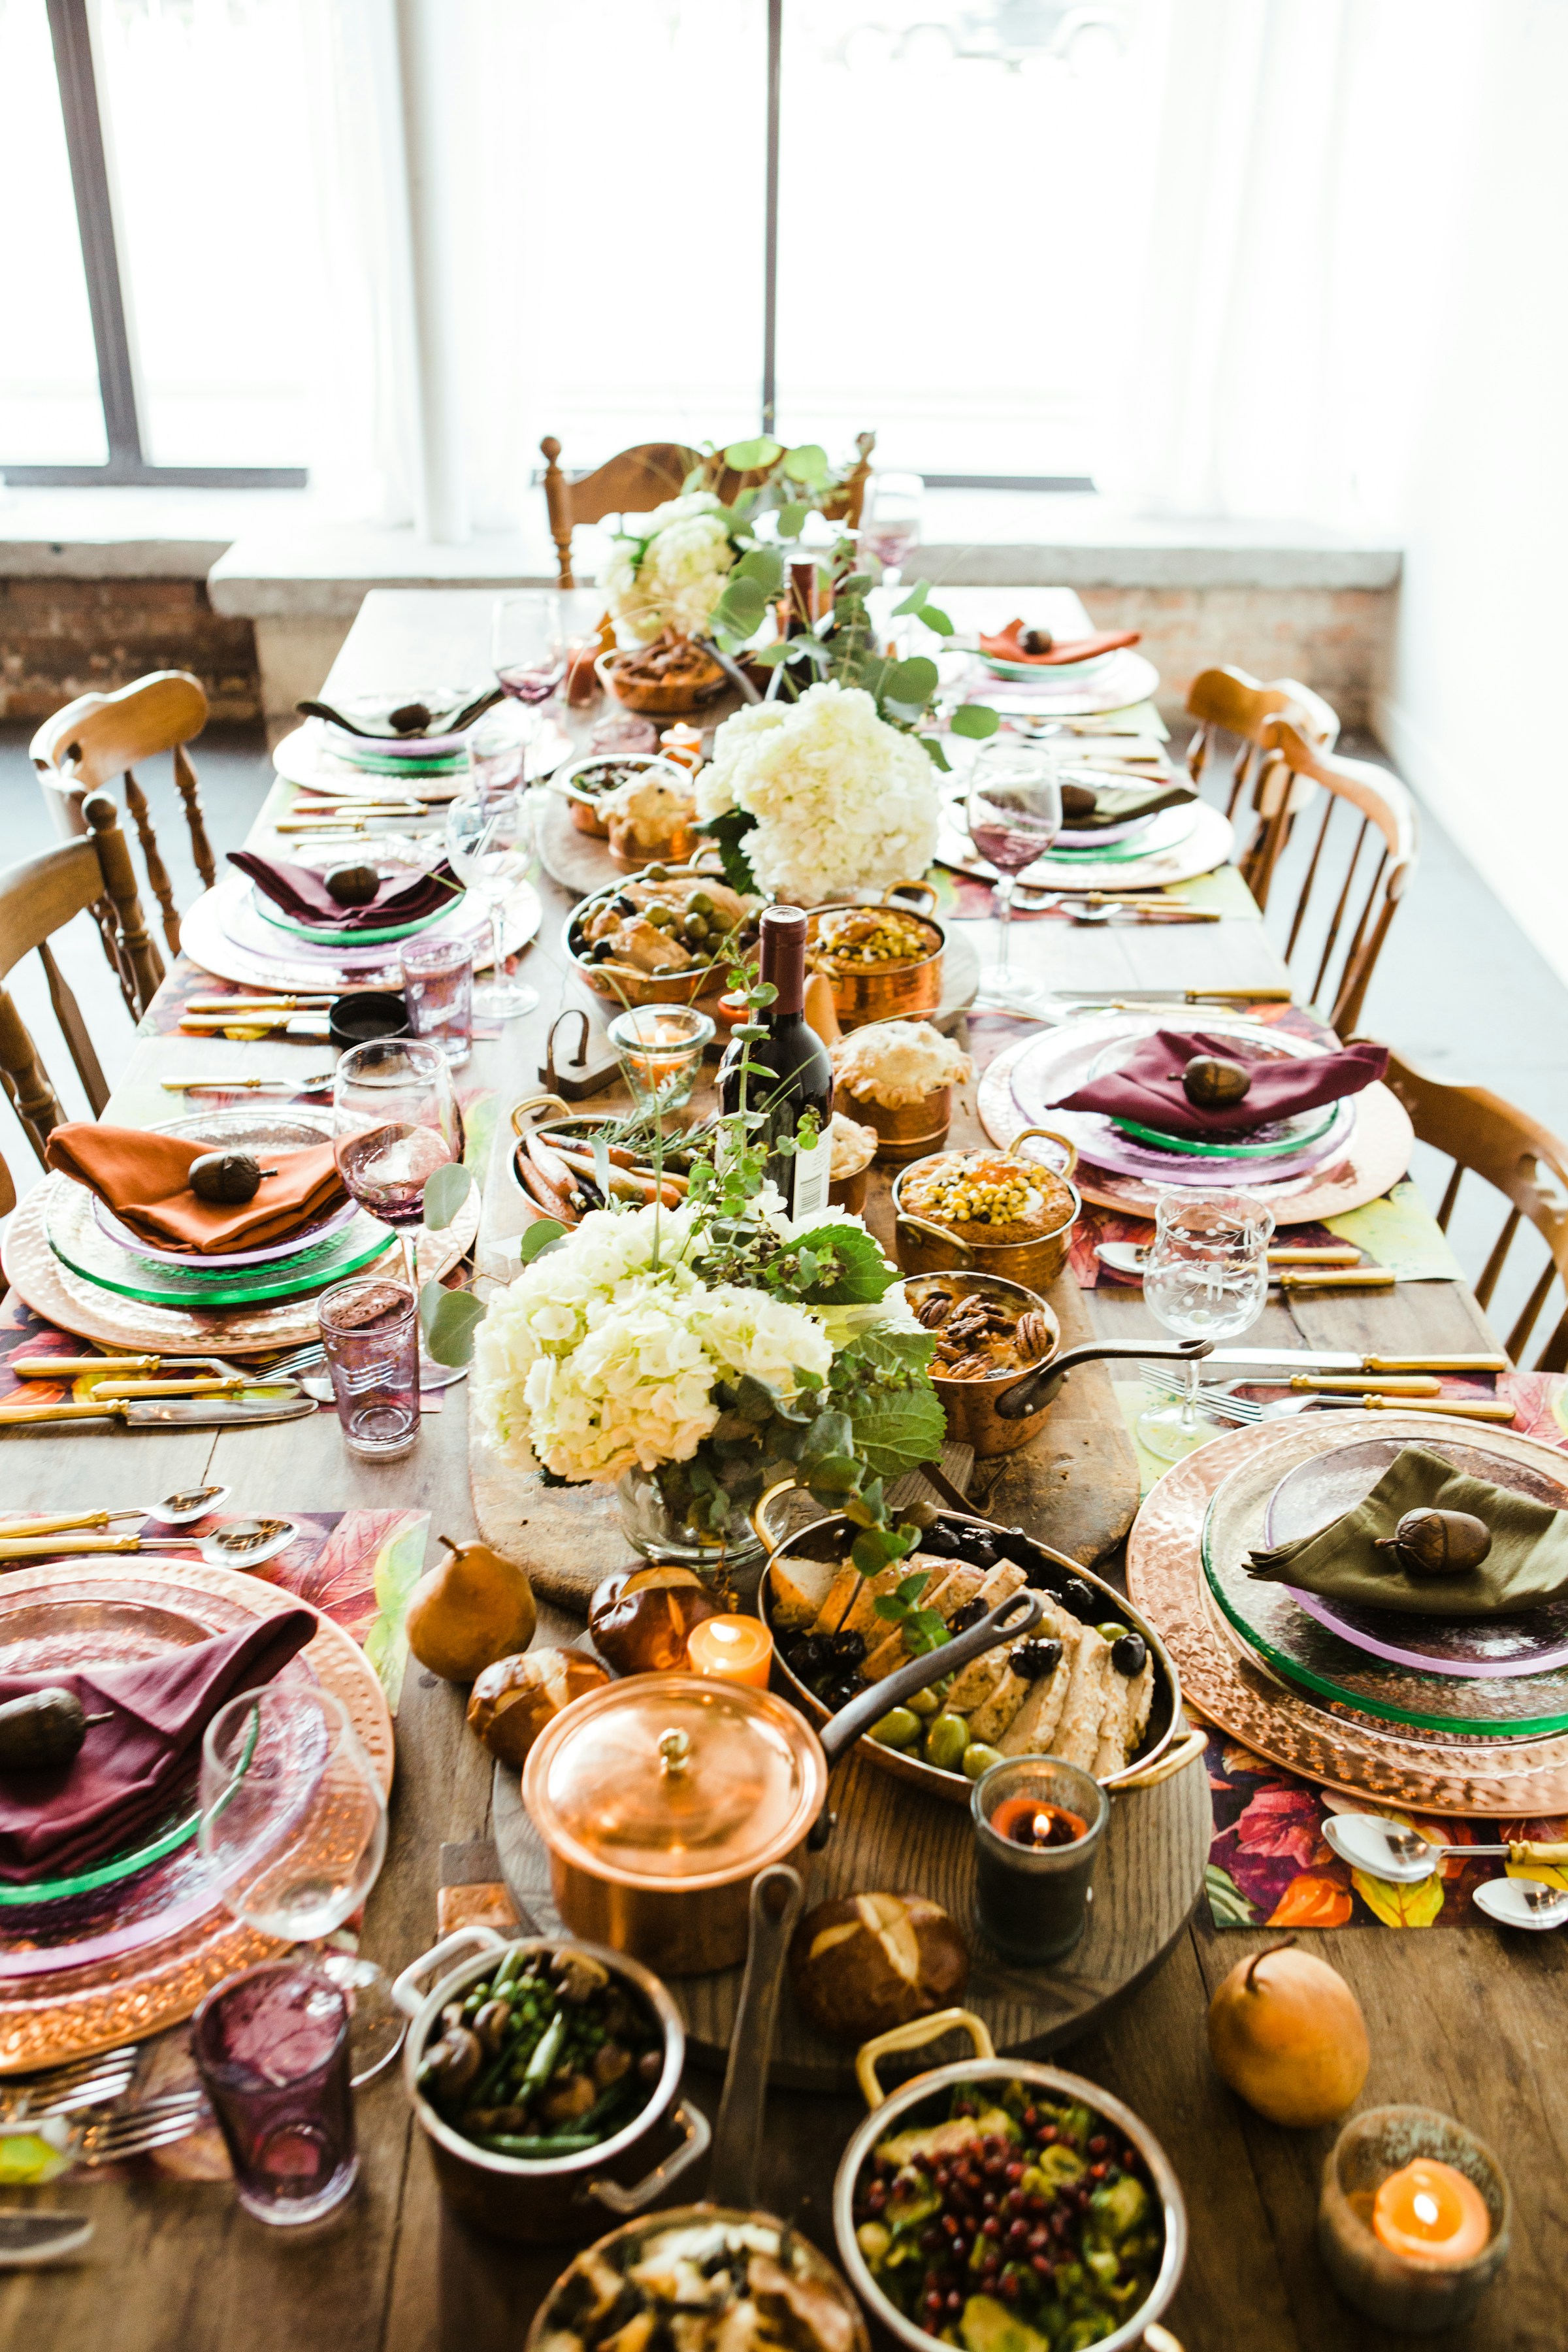 A dinner party setting | Source: Unsplash